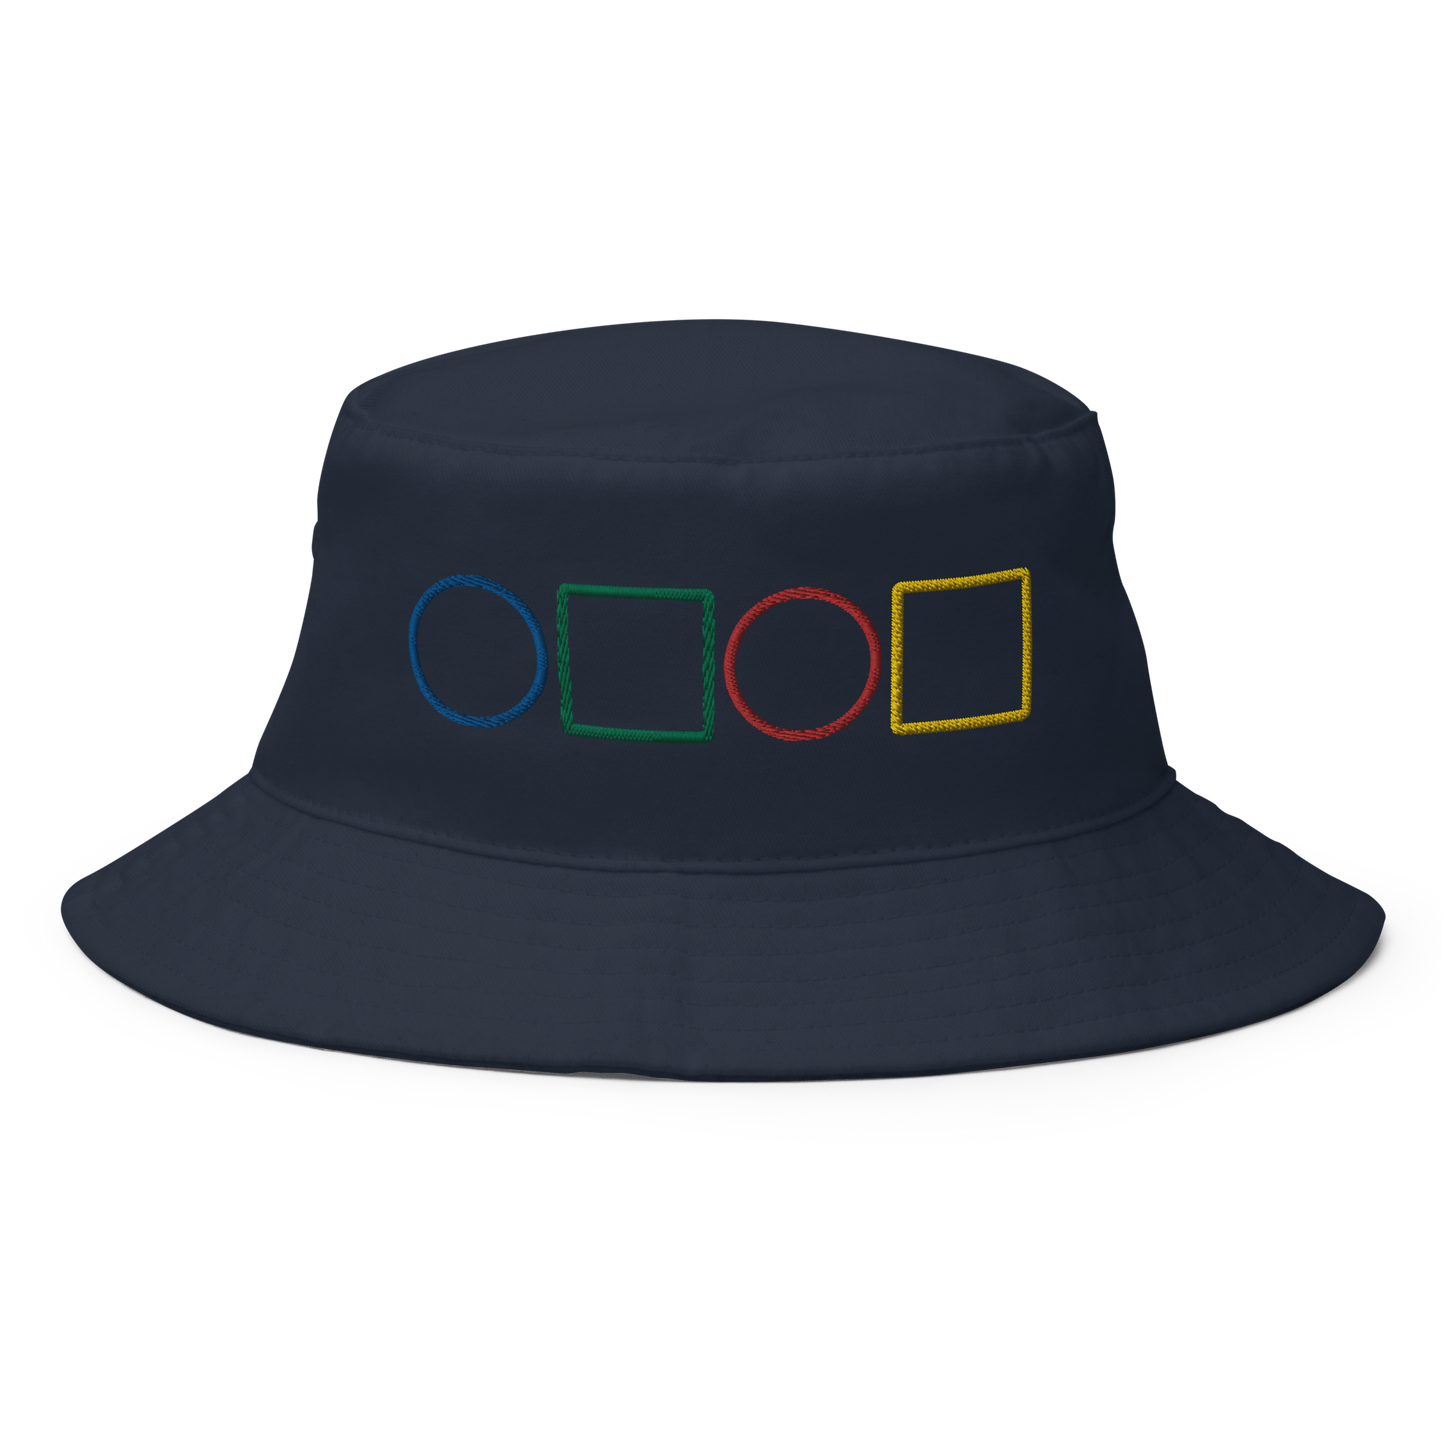 Sci-Fi Soldier Bucket Hat | Flat Embroidery | Inspired Phan Art